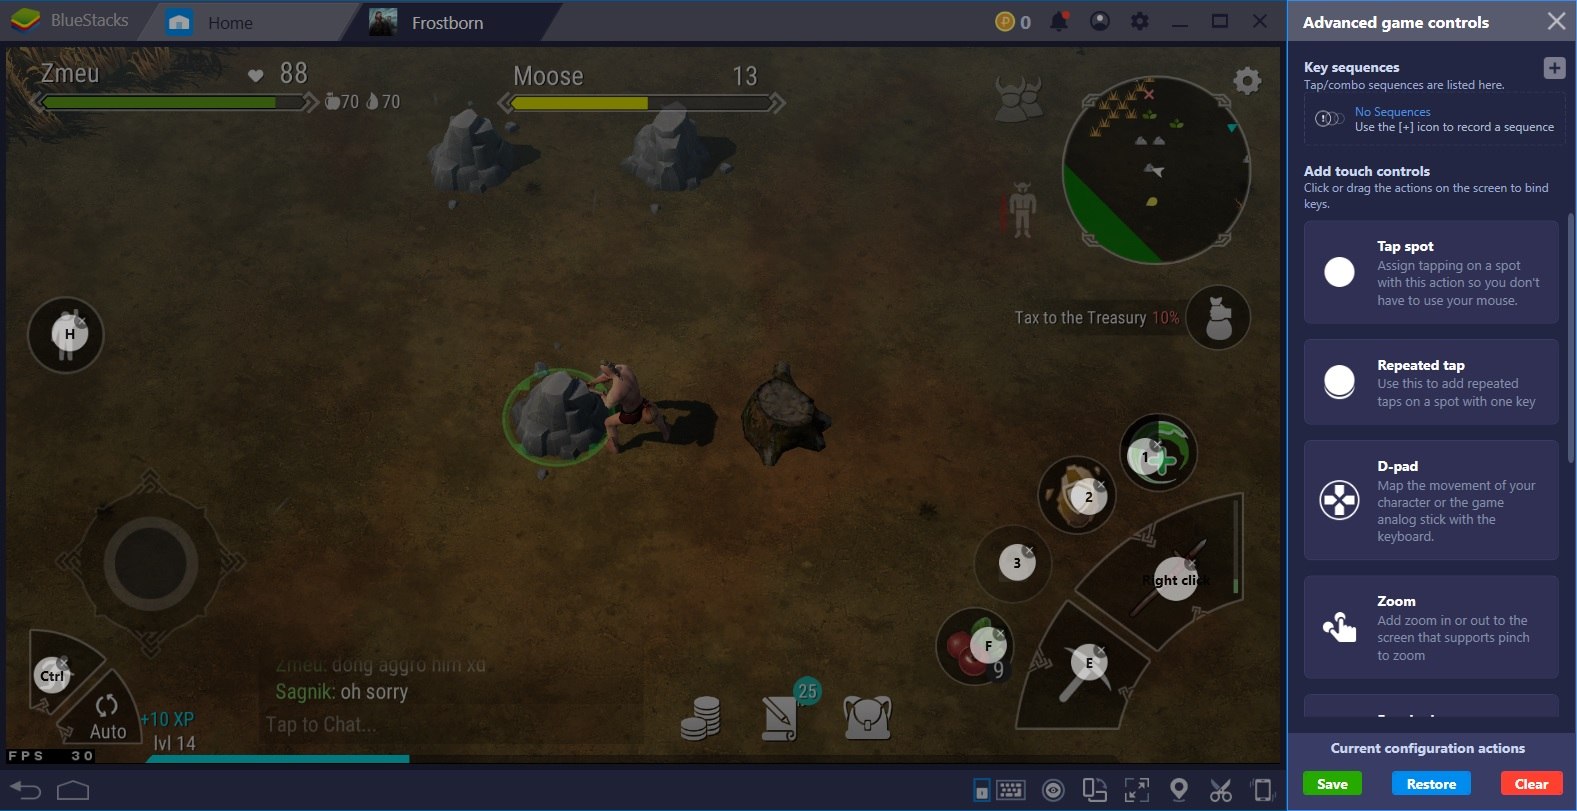 How to Install and Play Frostborn on BlueStacks